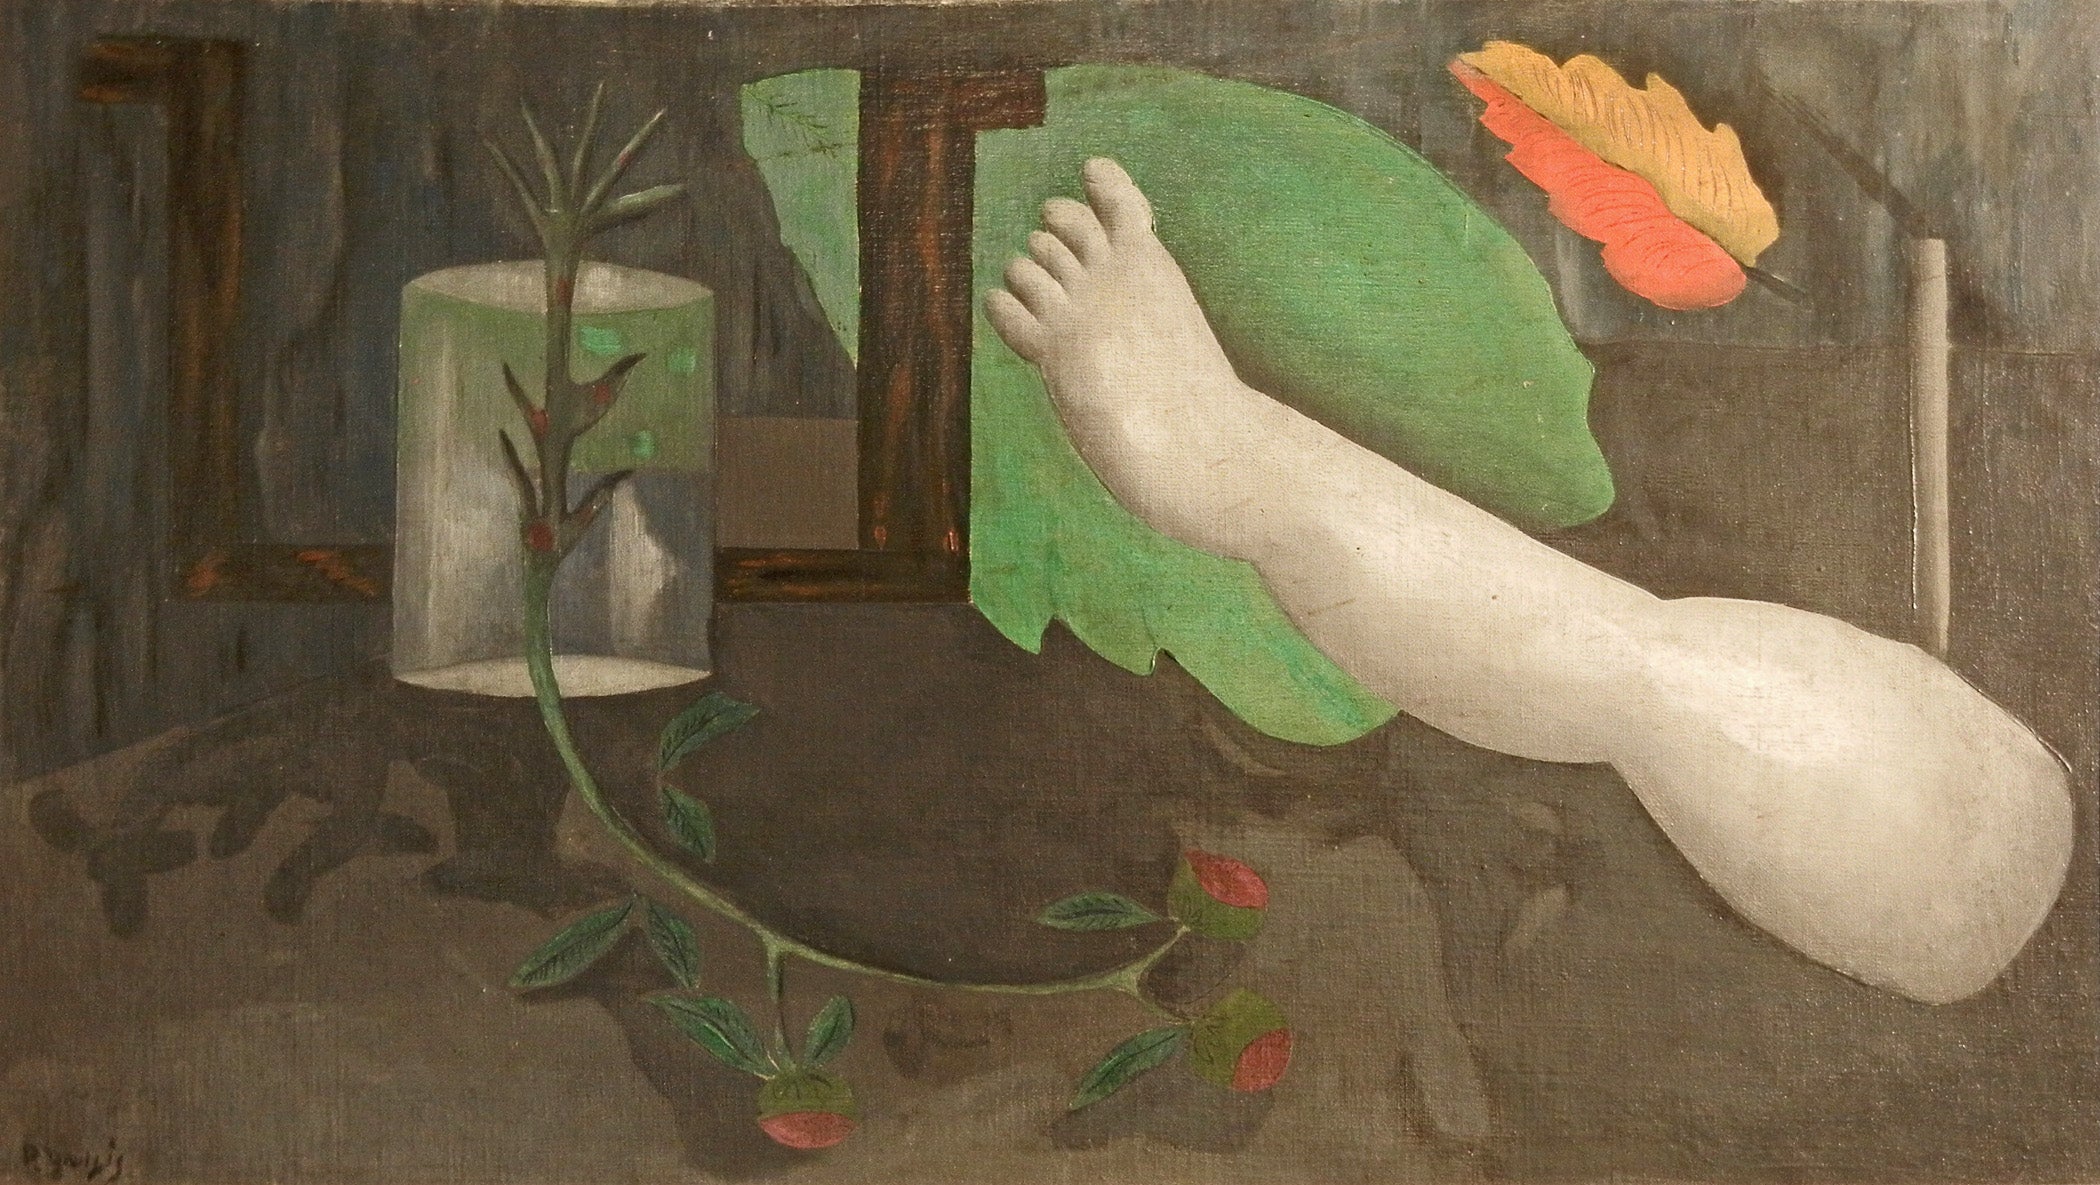 "Leg and Leaf, " Important Surrealist Painting by Gaulois, MOMA